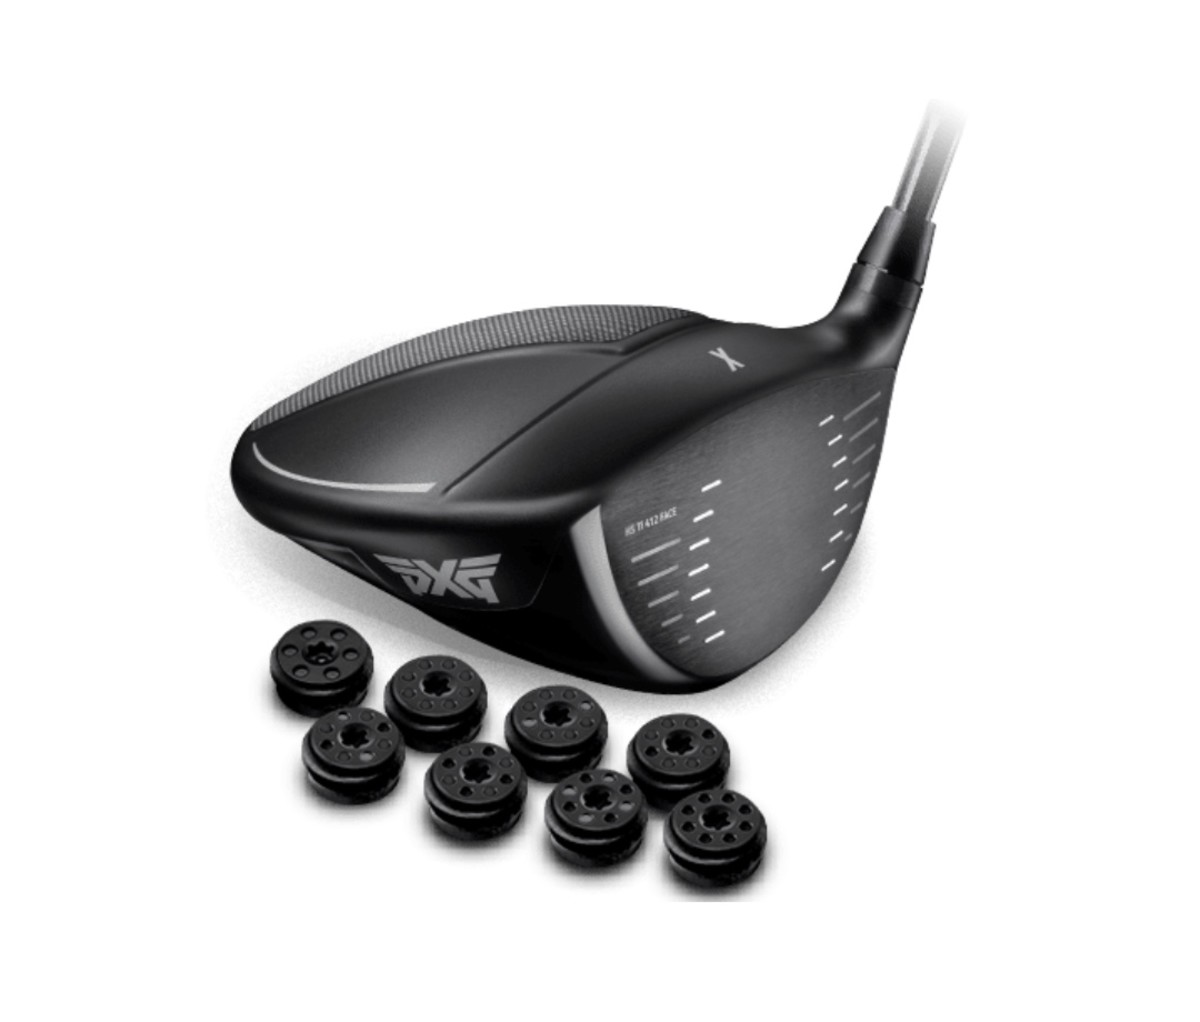 PXG Gen 4 driver golf clubs have three models to suit every player.